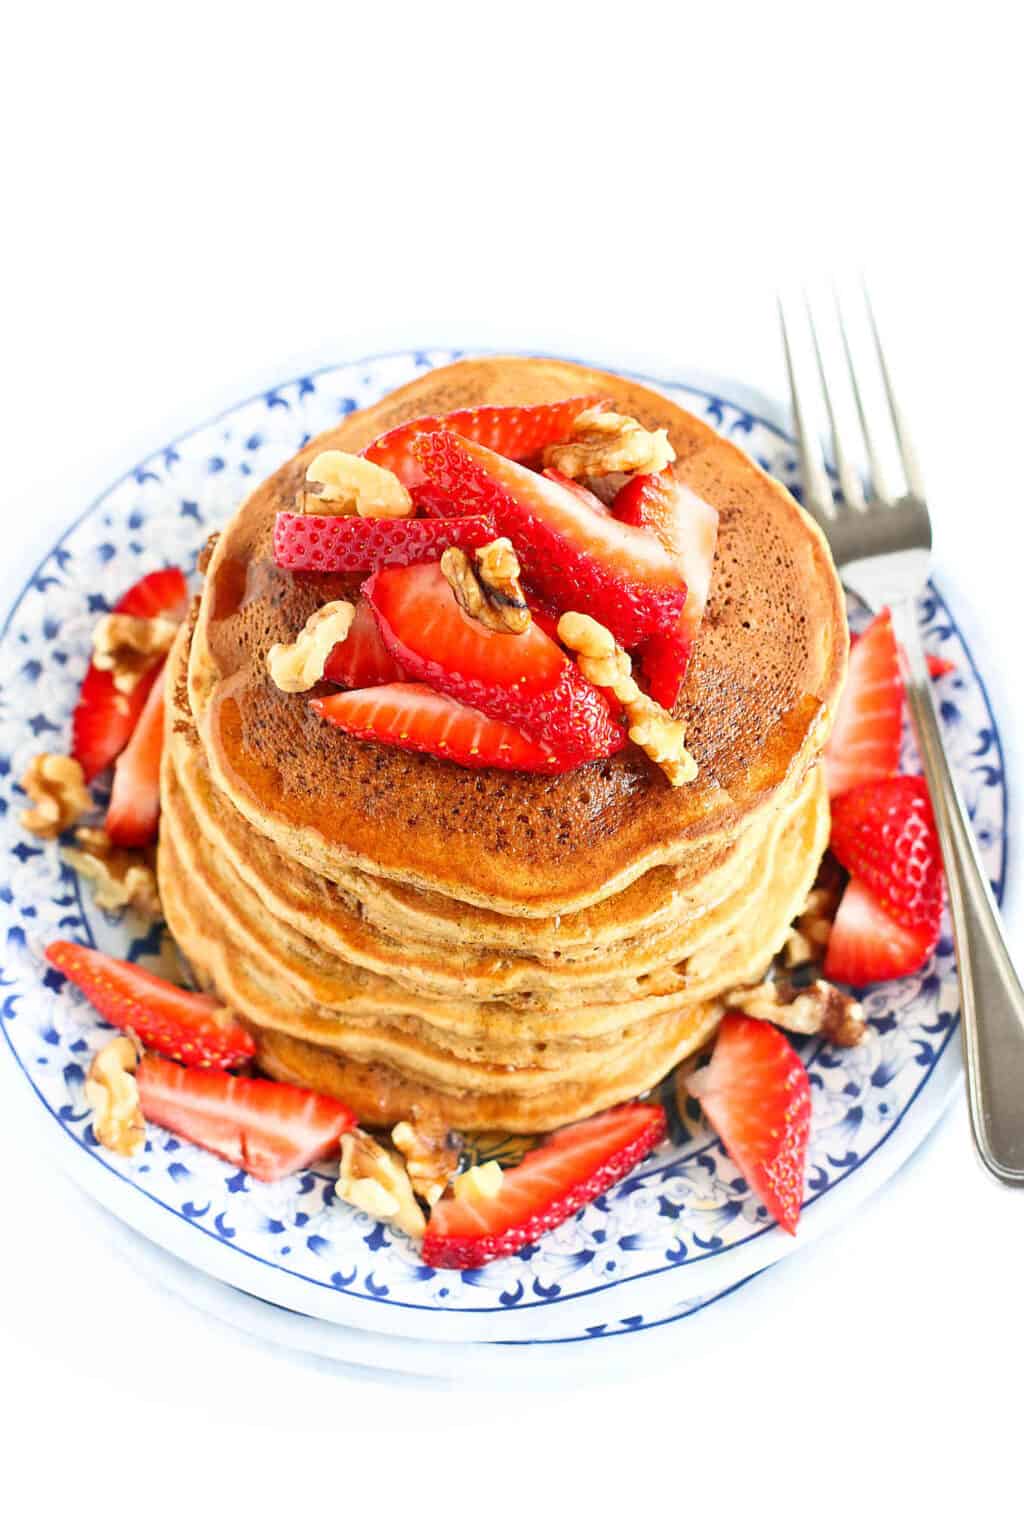 My kids can eat their weight in these Healthy Banana Pancakes. Fluffy and full of flavor, they’re great for breakfast or dinner! 152 calories and 3 Weight Watchers SP | Easy | Pancake Recipe | Fluffy | Whole Wheat | Simple #bananapancakes #wholewheatpancakes #healthypancakes #brunchrecipes #healthybreakfastideas #smartpoints #weightwatchers